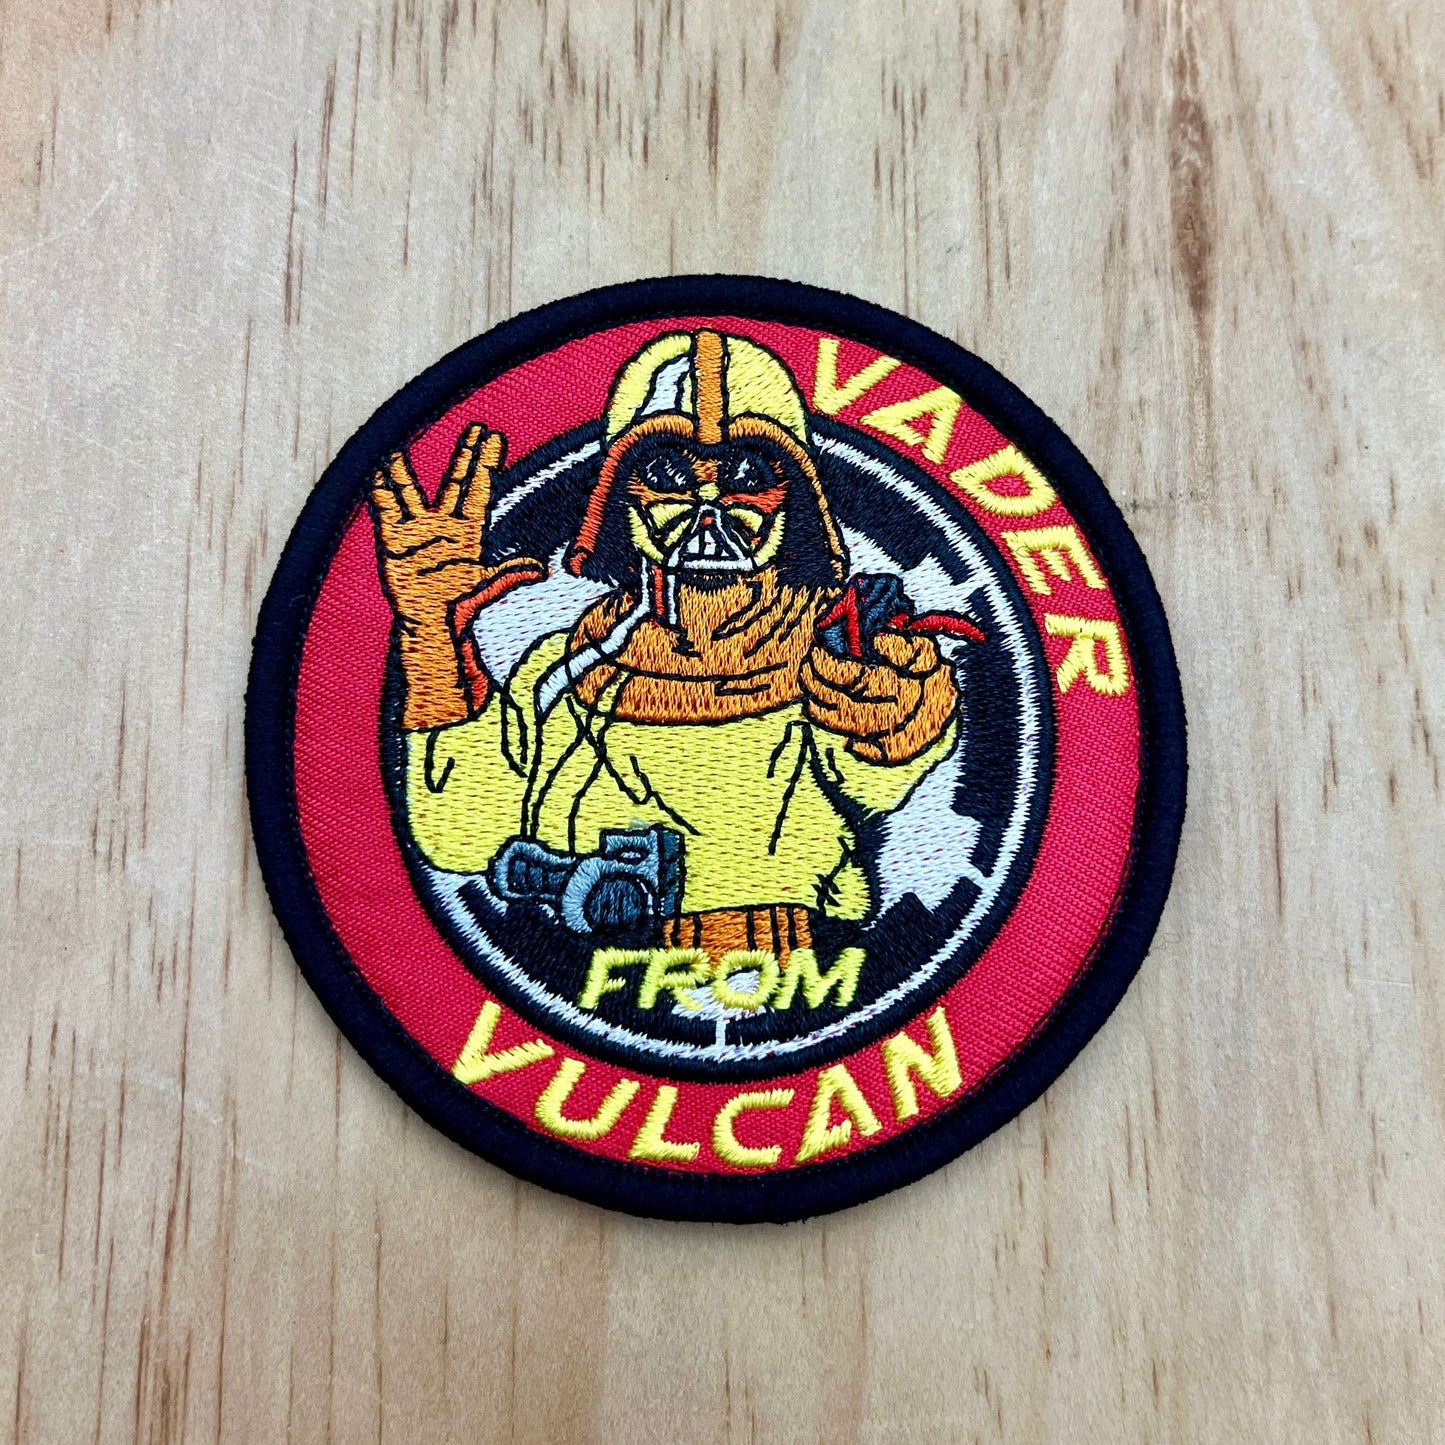 Vader From Vulcan patch